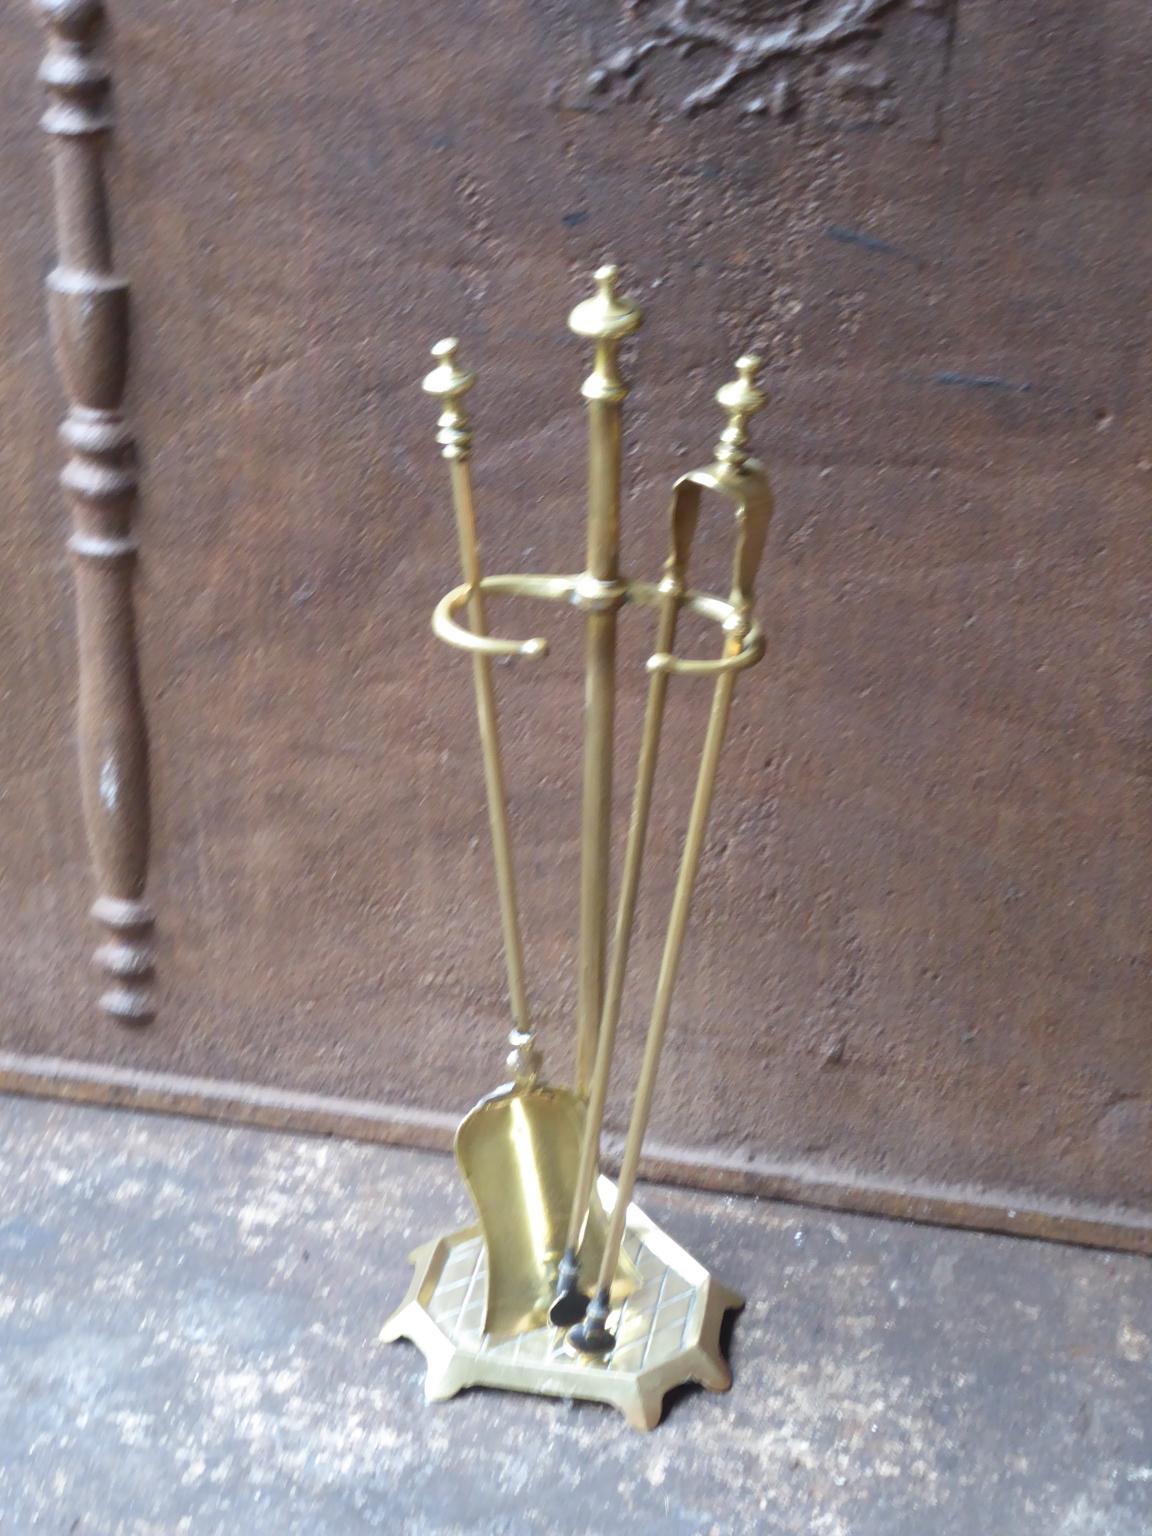 Napoleon III Antique French Fireplace Tools or Fire Tools, 19th - early 20th Century For Sale